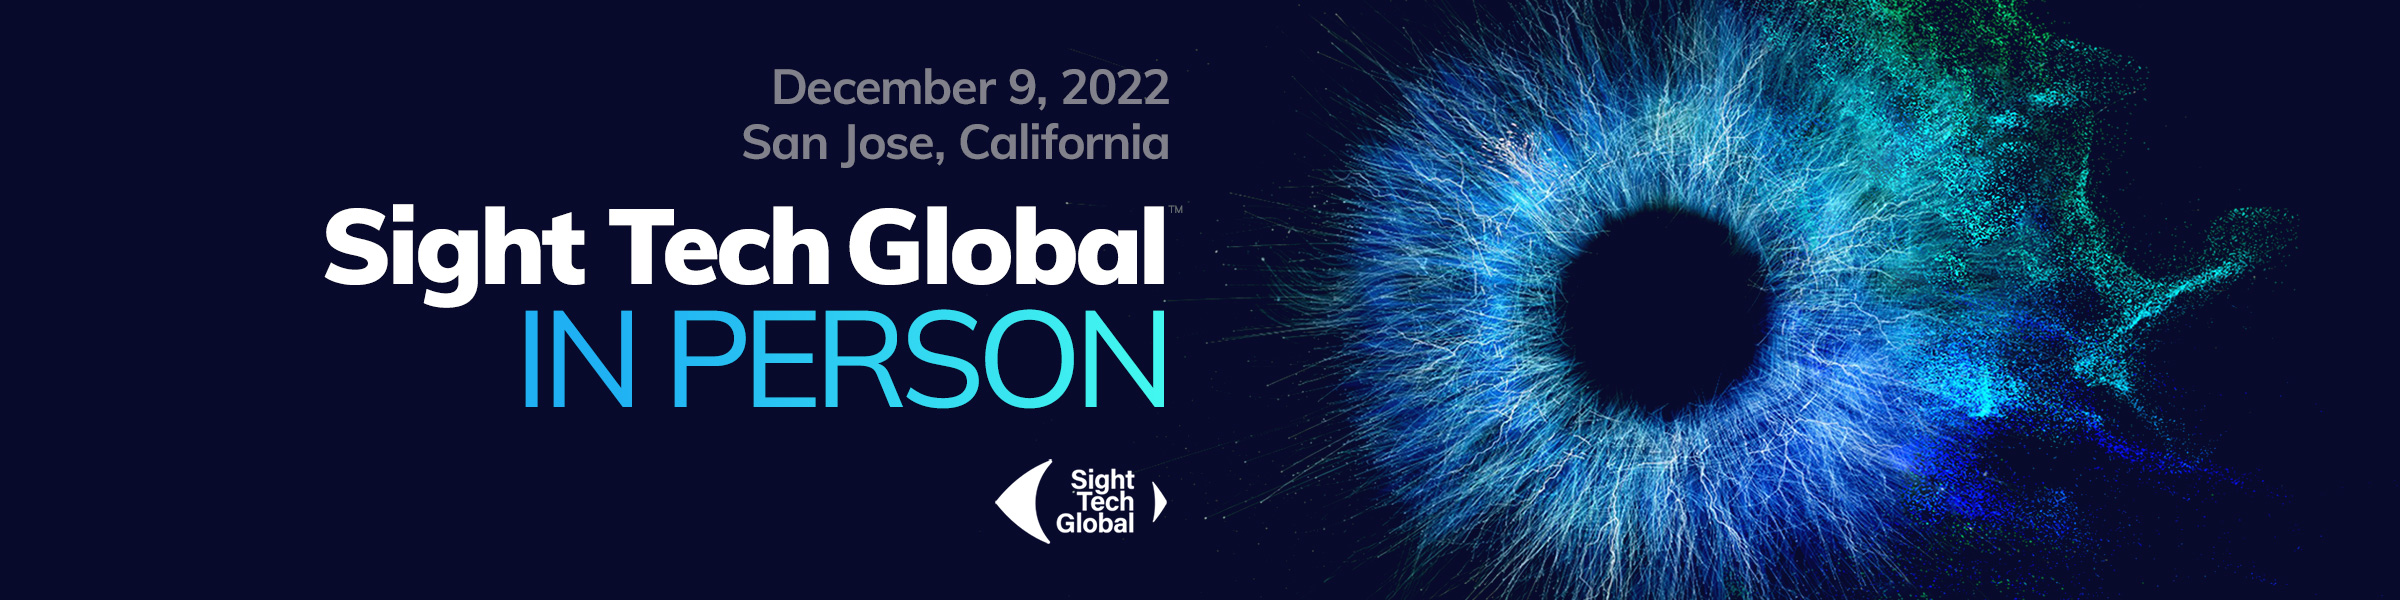 Sight Tech Global In Person event